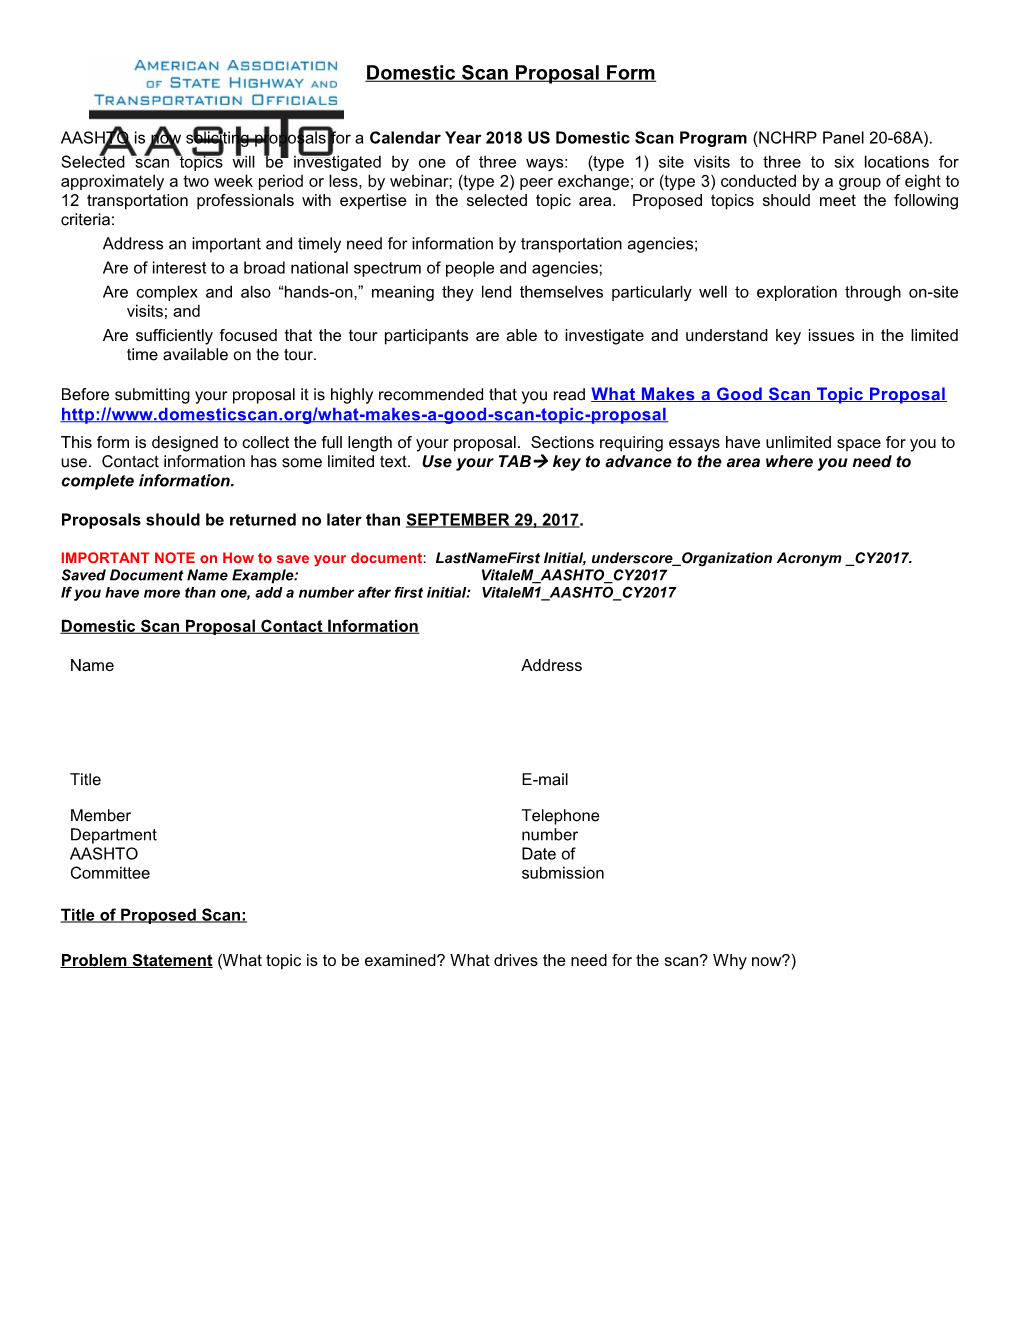 AASHTO Domestic Scan Proposal Form s2